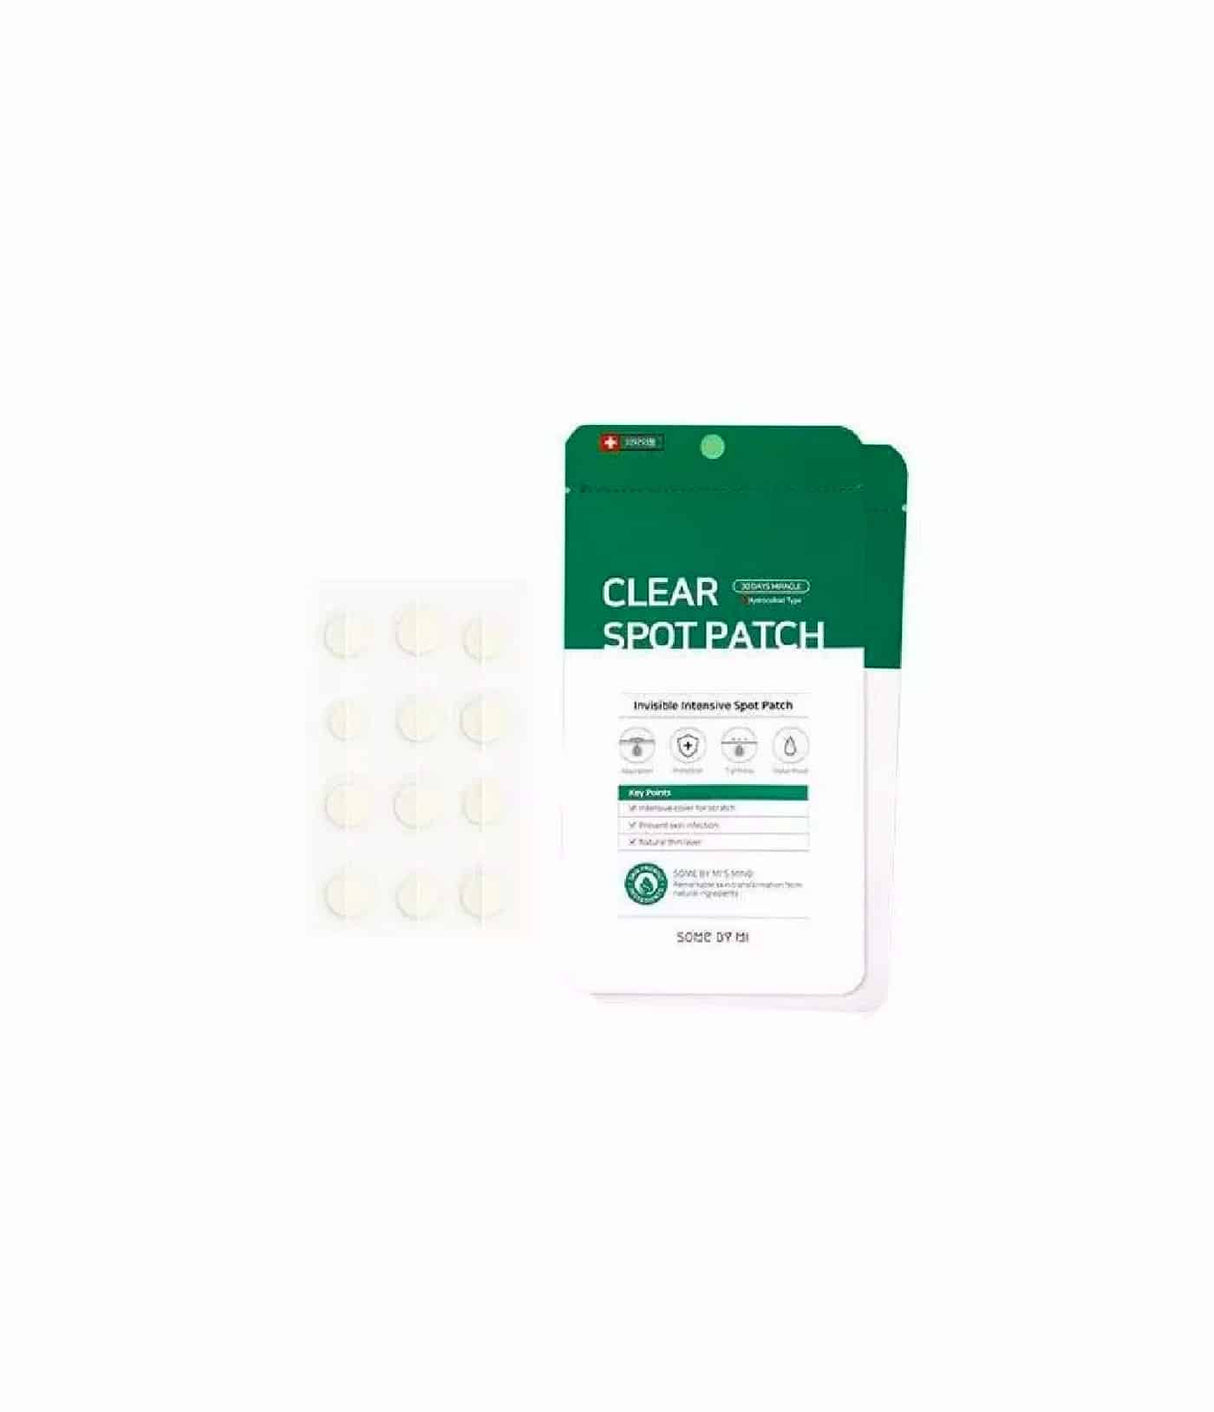 Some-By-Mi-30-Days-Miracle-Clear-Spot-Patch-1